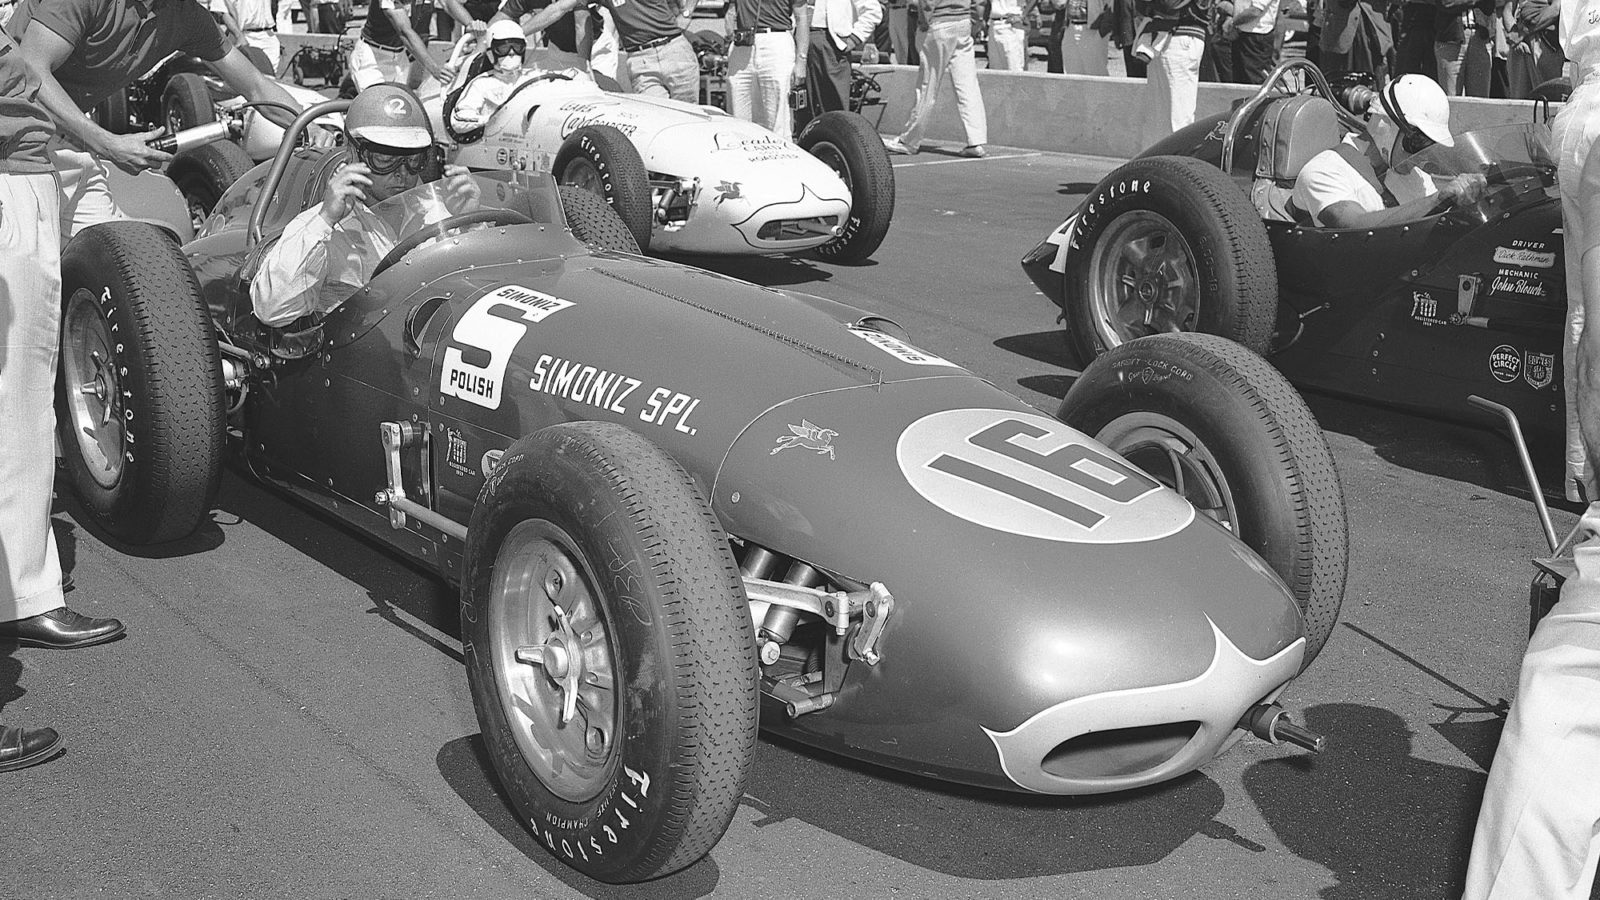 DAYTONA BEACH, FL - APRIL 4, 1959: Jim Rathmann prepares for the start of the Daytona 100 USAC Indy Car race at Daytona International Speedway. Driving the Simoniz Special for Miami car owner Lindsey Hopkins, Rathmann led 35 of the 40 laps in winning the event. (Photo by ISC Images & Archives via Getty Images)